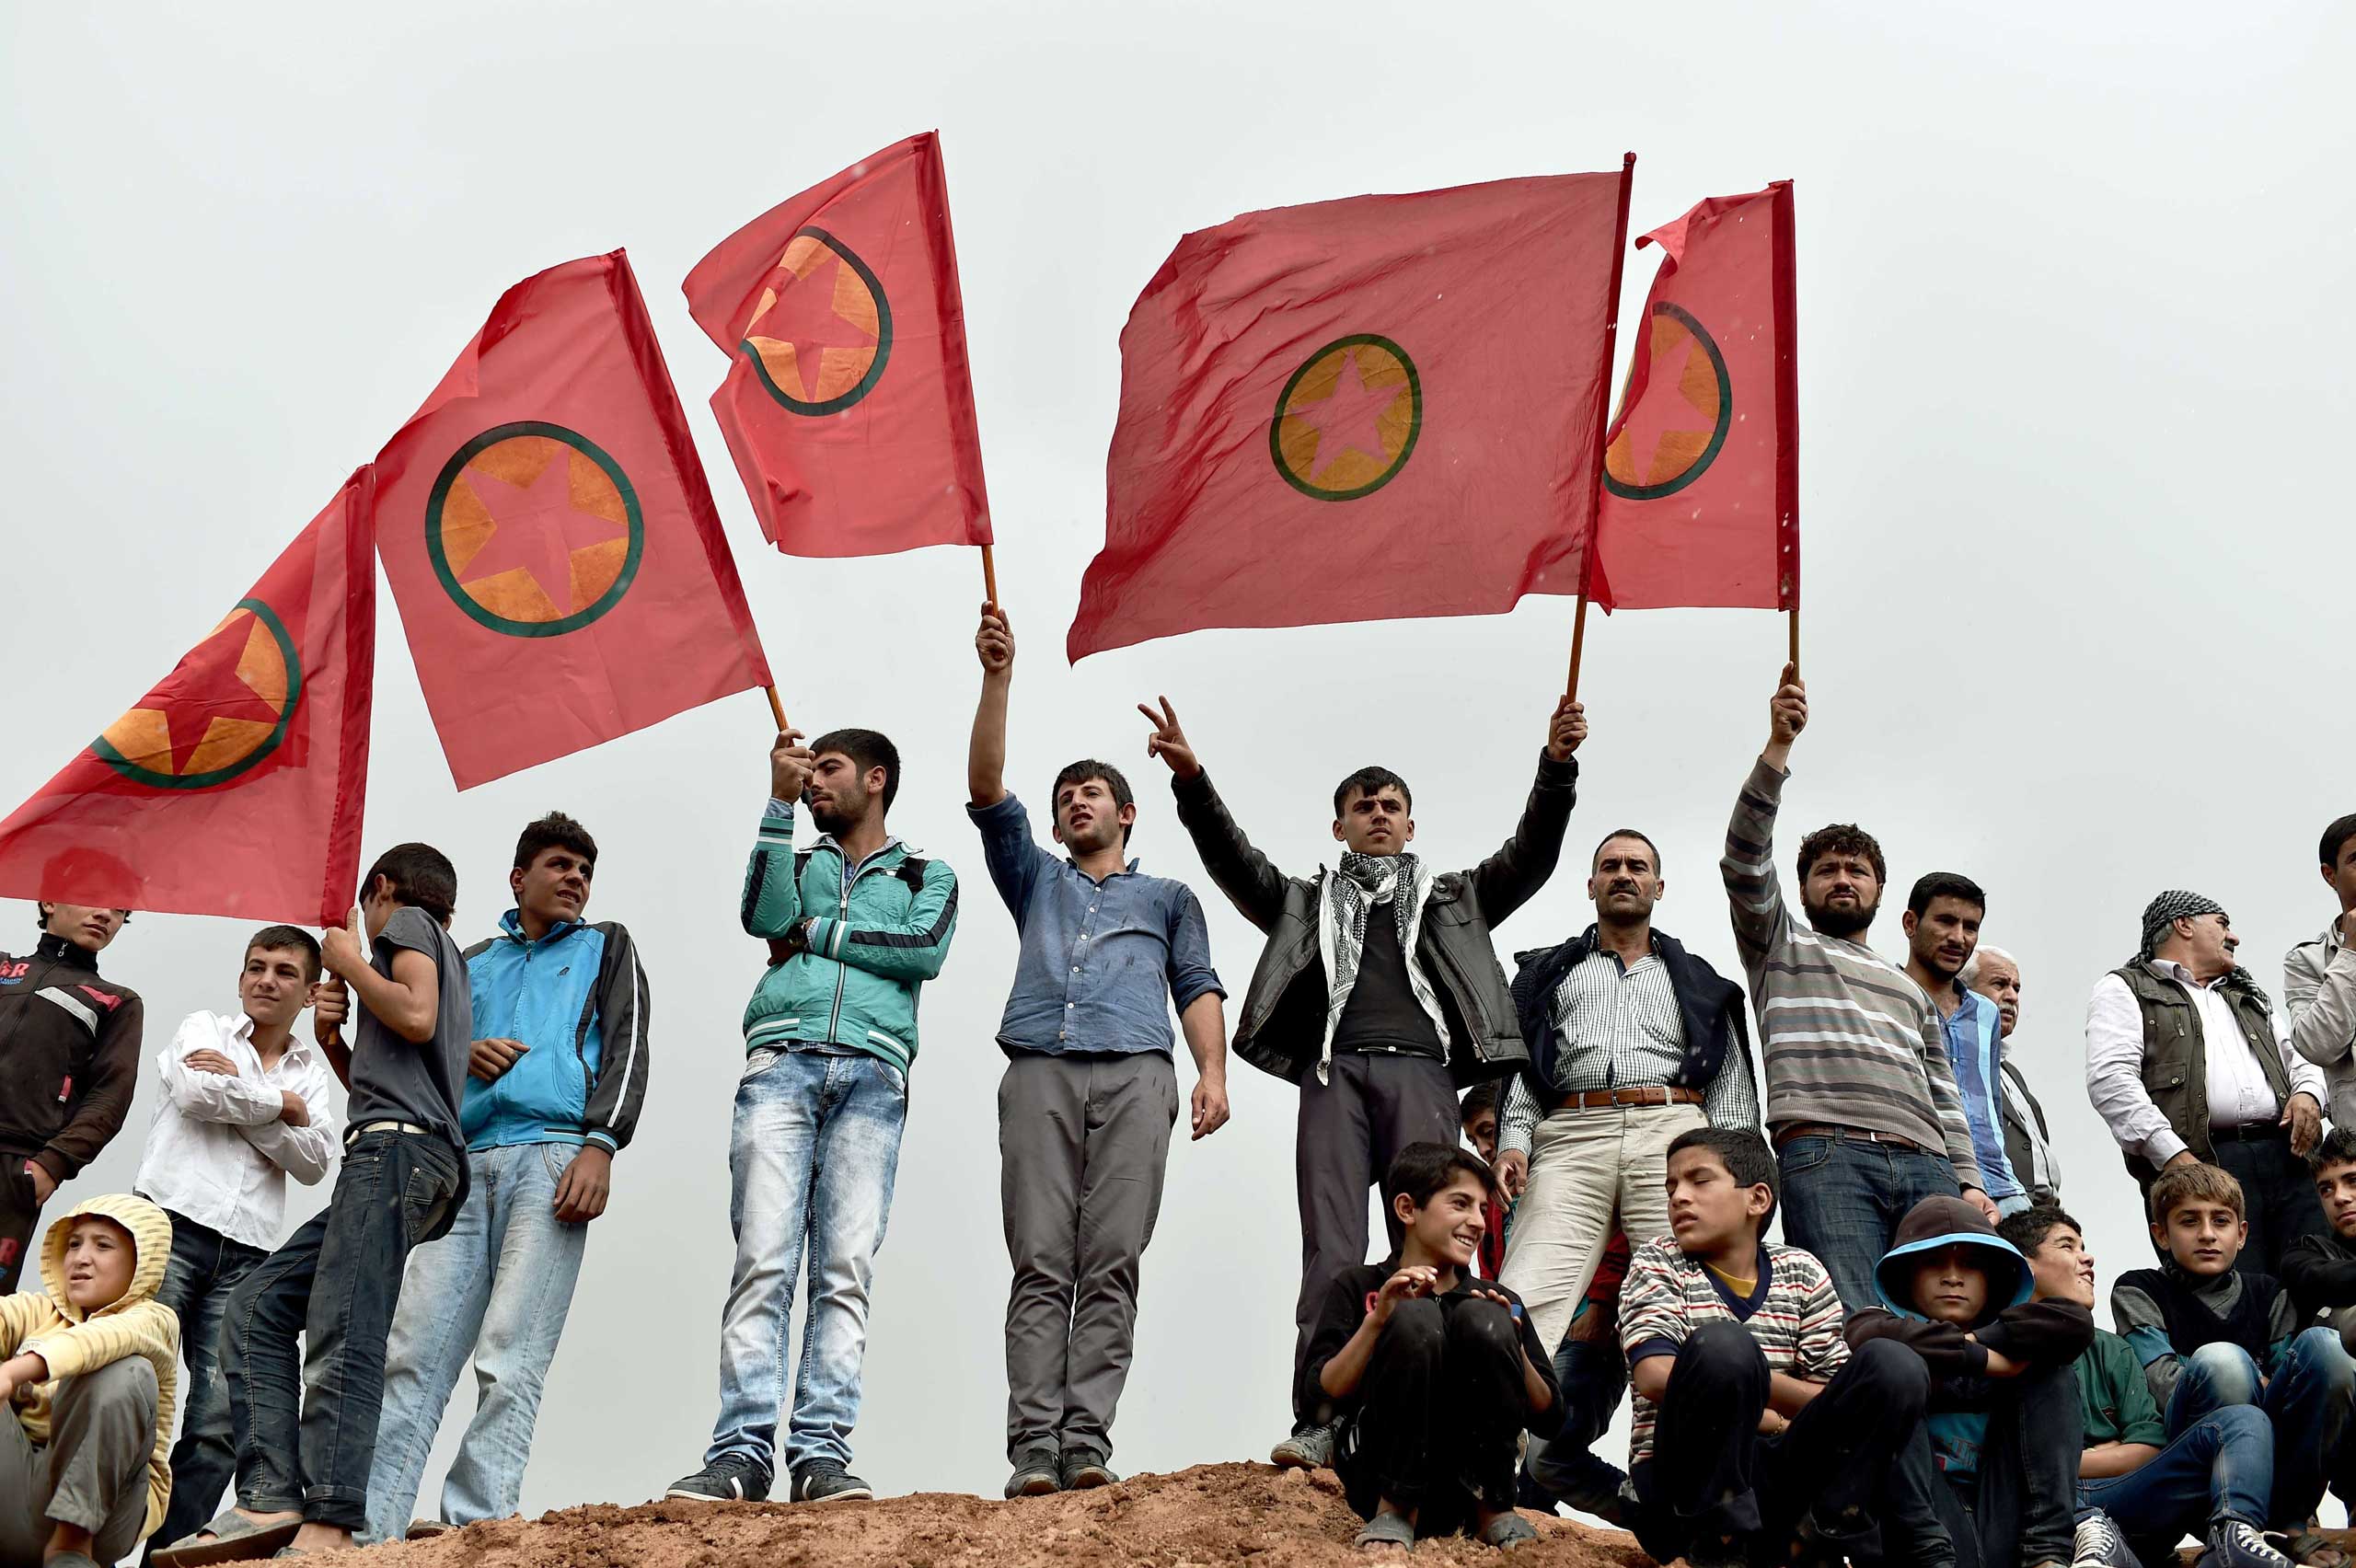 Kurdish people wave Kurdistan Workers' Party (PKK) flags while attending a funeral ceremony for YPG (People's Protection Units) fighters in the town of Suruc, Sanliurfa province, on Oct. 14, 2014. (Aris Messinis—AFP/Getty Images)